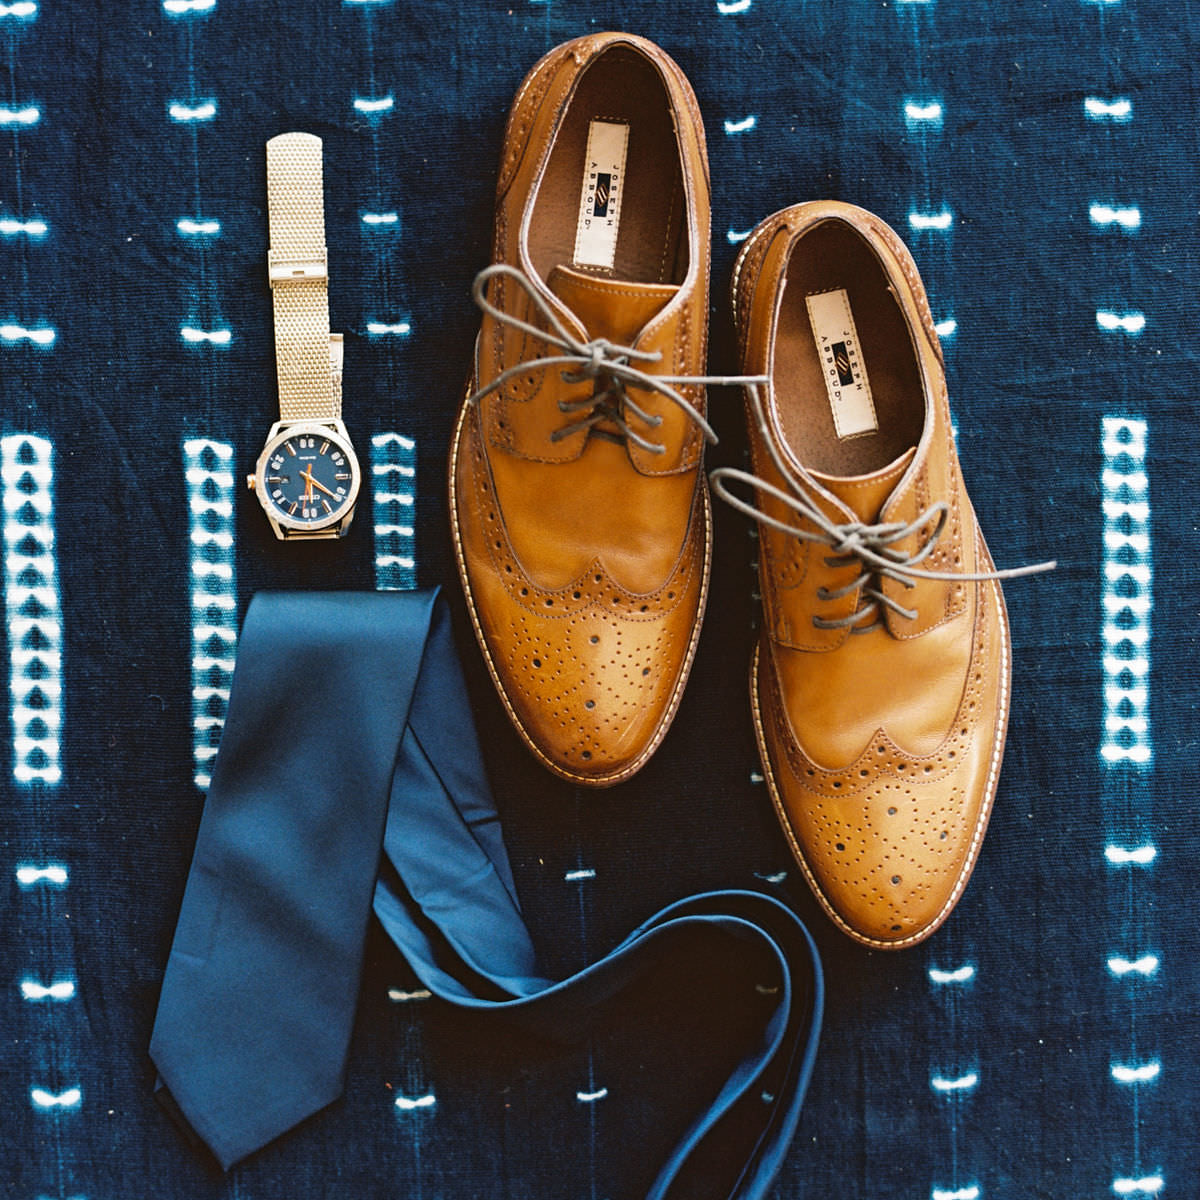 watch, tie and shoes in a flatlay